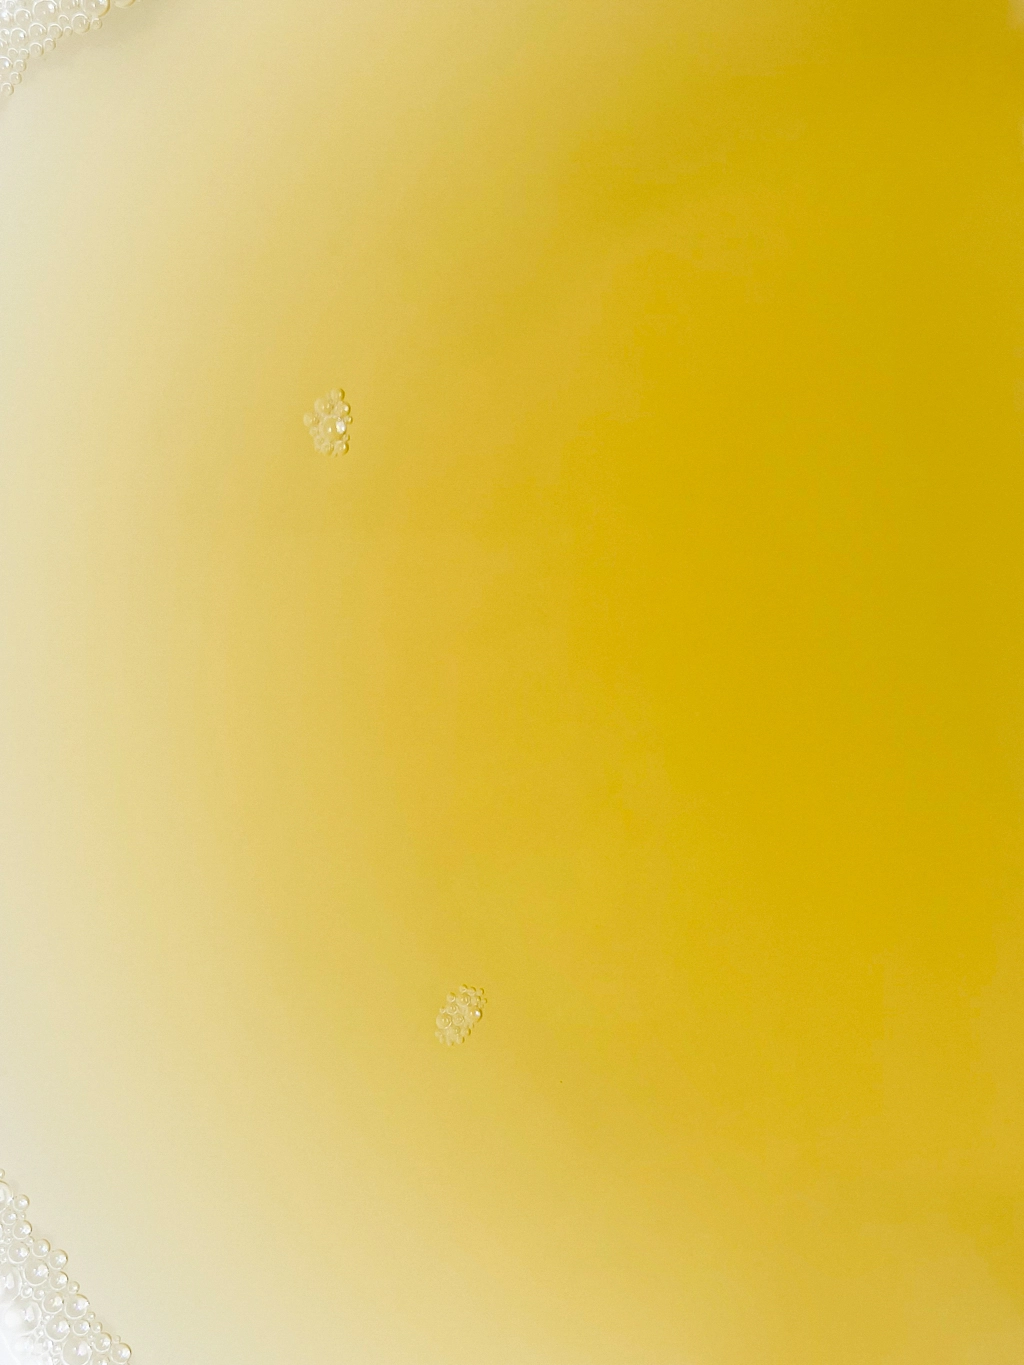 Artwork showing a close-up of a soup stock made with dried tuna flakes. There is a beautiful gradation of dark yellow and light yellow hues, and fine bubbles can be seen here and there.